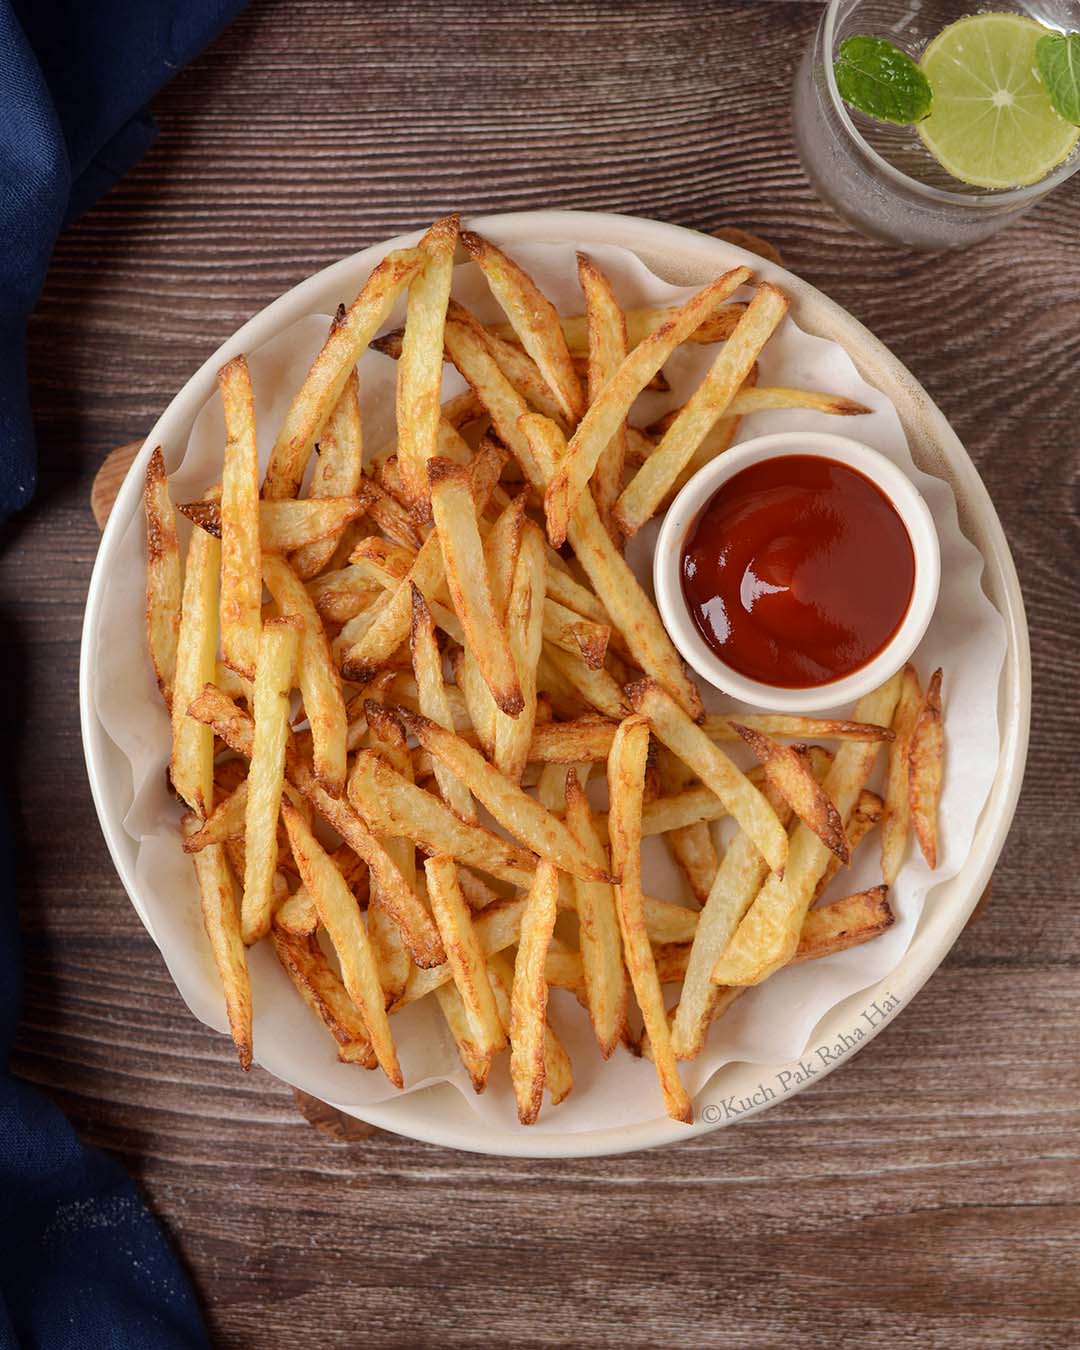 Crispy Air Fryer Shoestring Fries & Deep Fry Option - Savory Thoughts